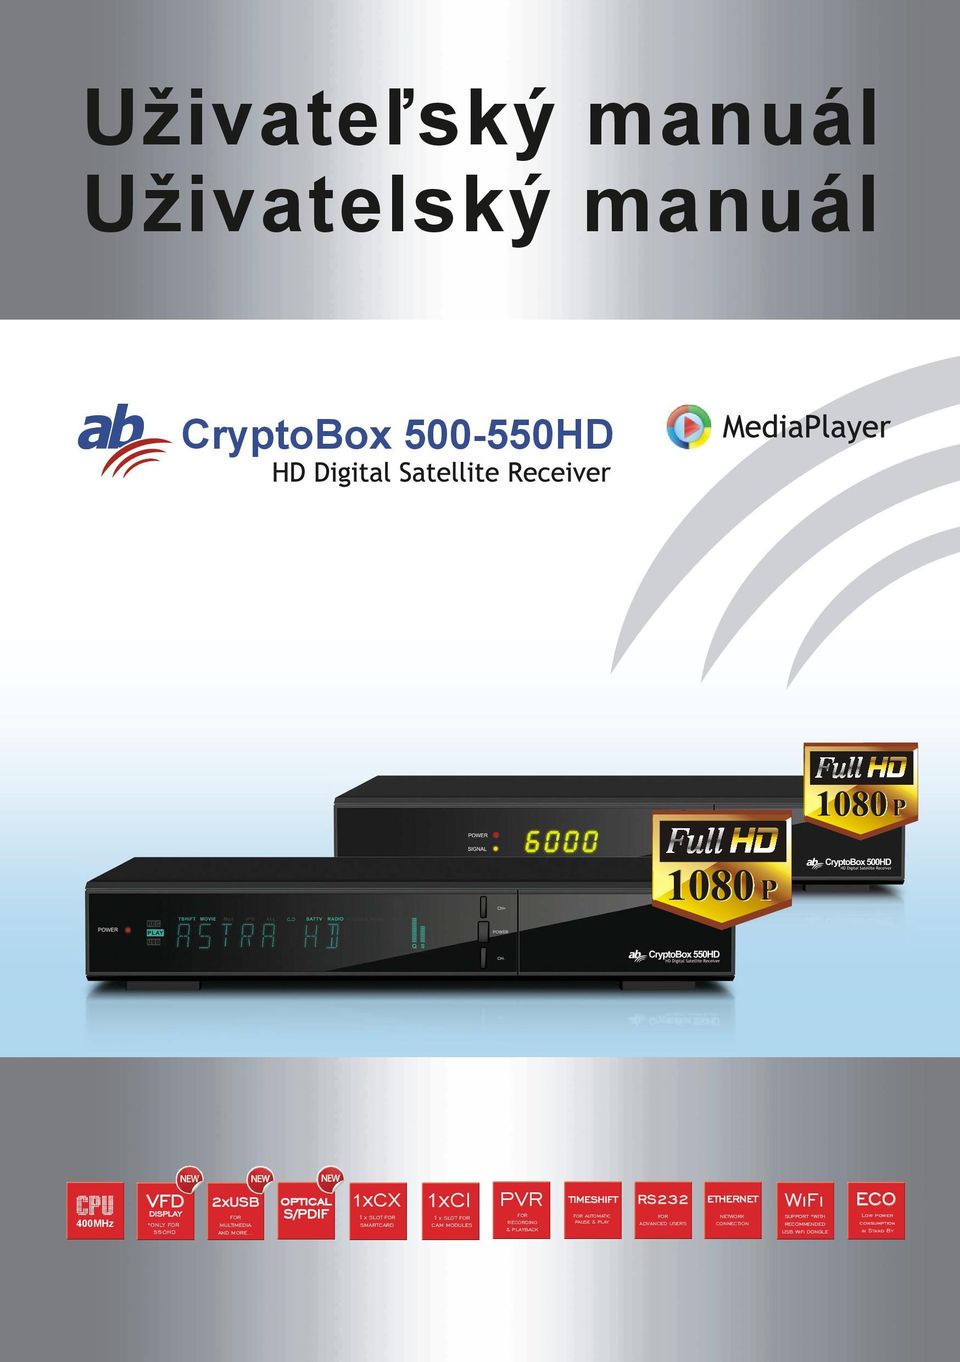 Uživatelský manuál. CryptoBox HD PVR. WiFi SUPPORT *WITH RECOMMENDED USB  WiFi DONGLE. ECO Low power consumption in Stand By VFD - PDF Free Download